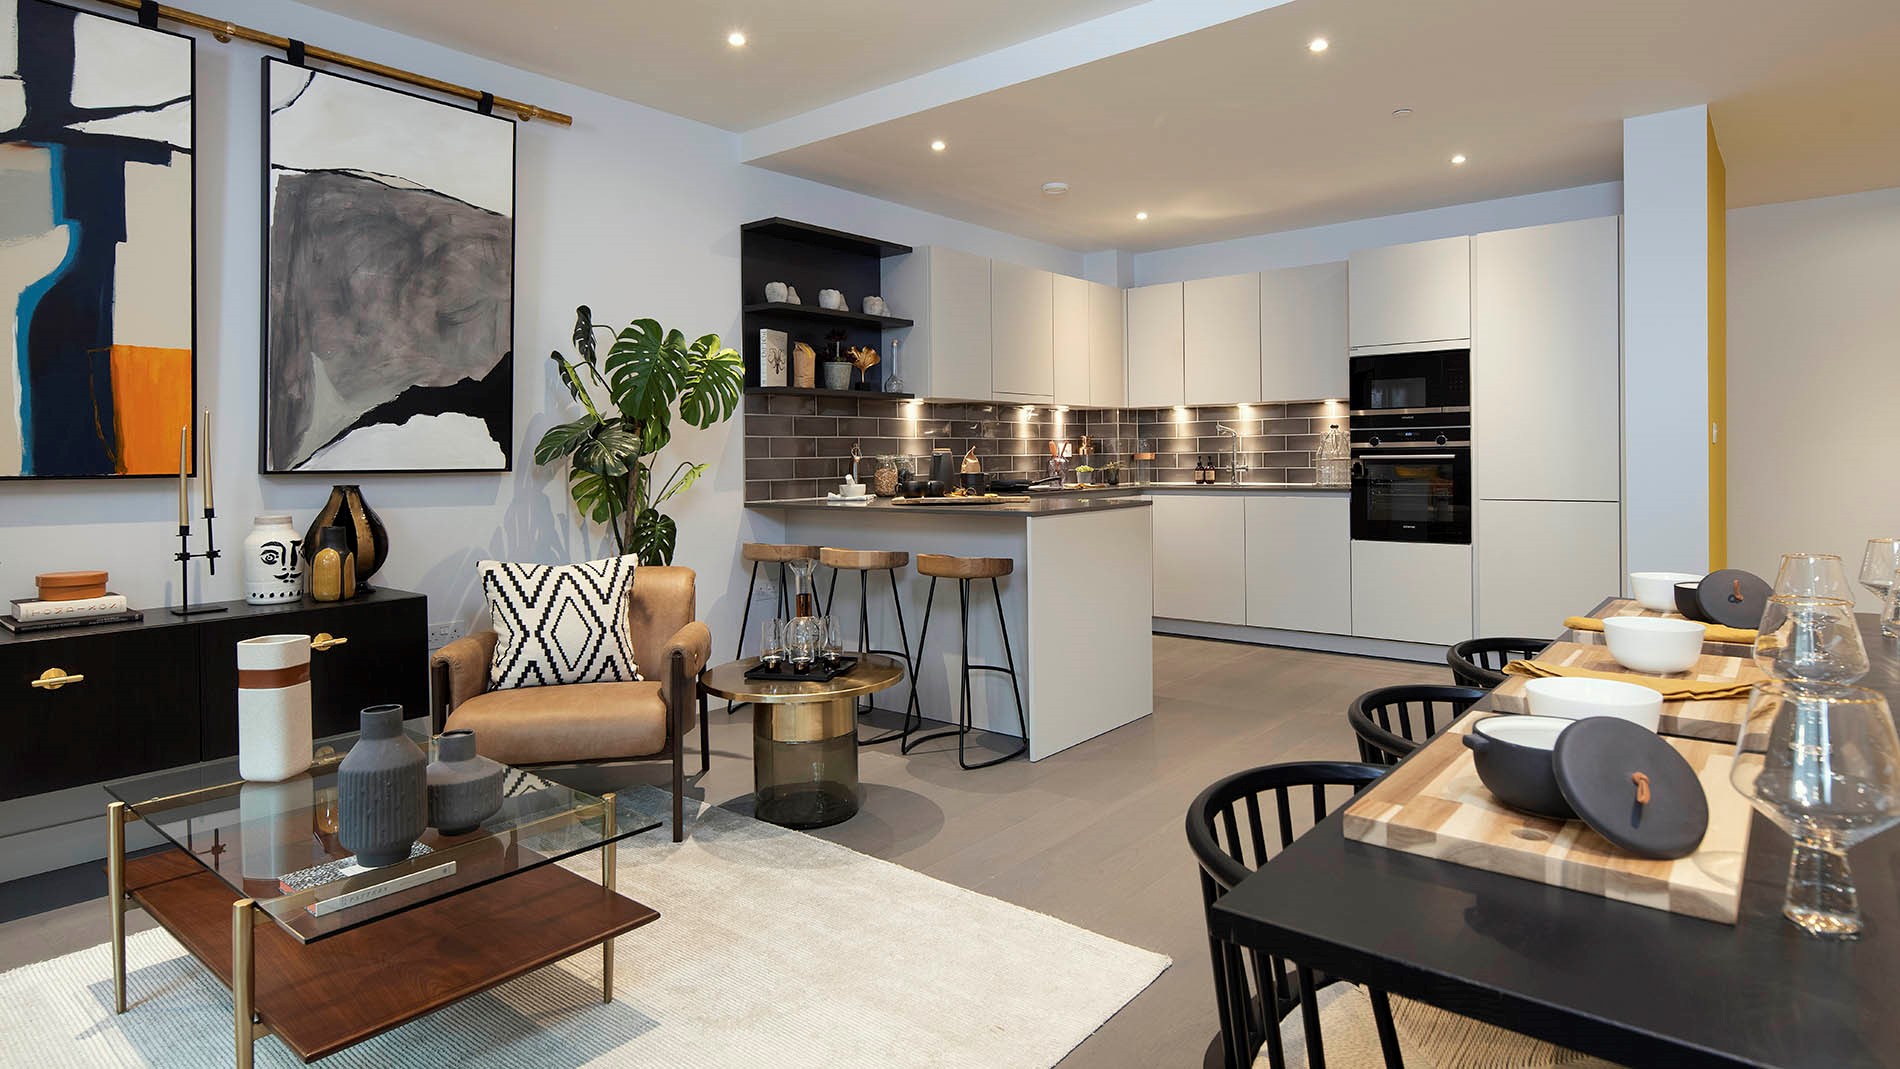 BERMONDSEY BUYERS FIND A PLACE TO CALL HOME AT LAZENBY SQUARE, SE1